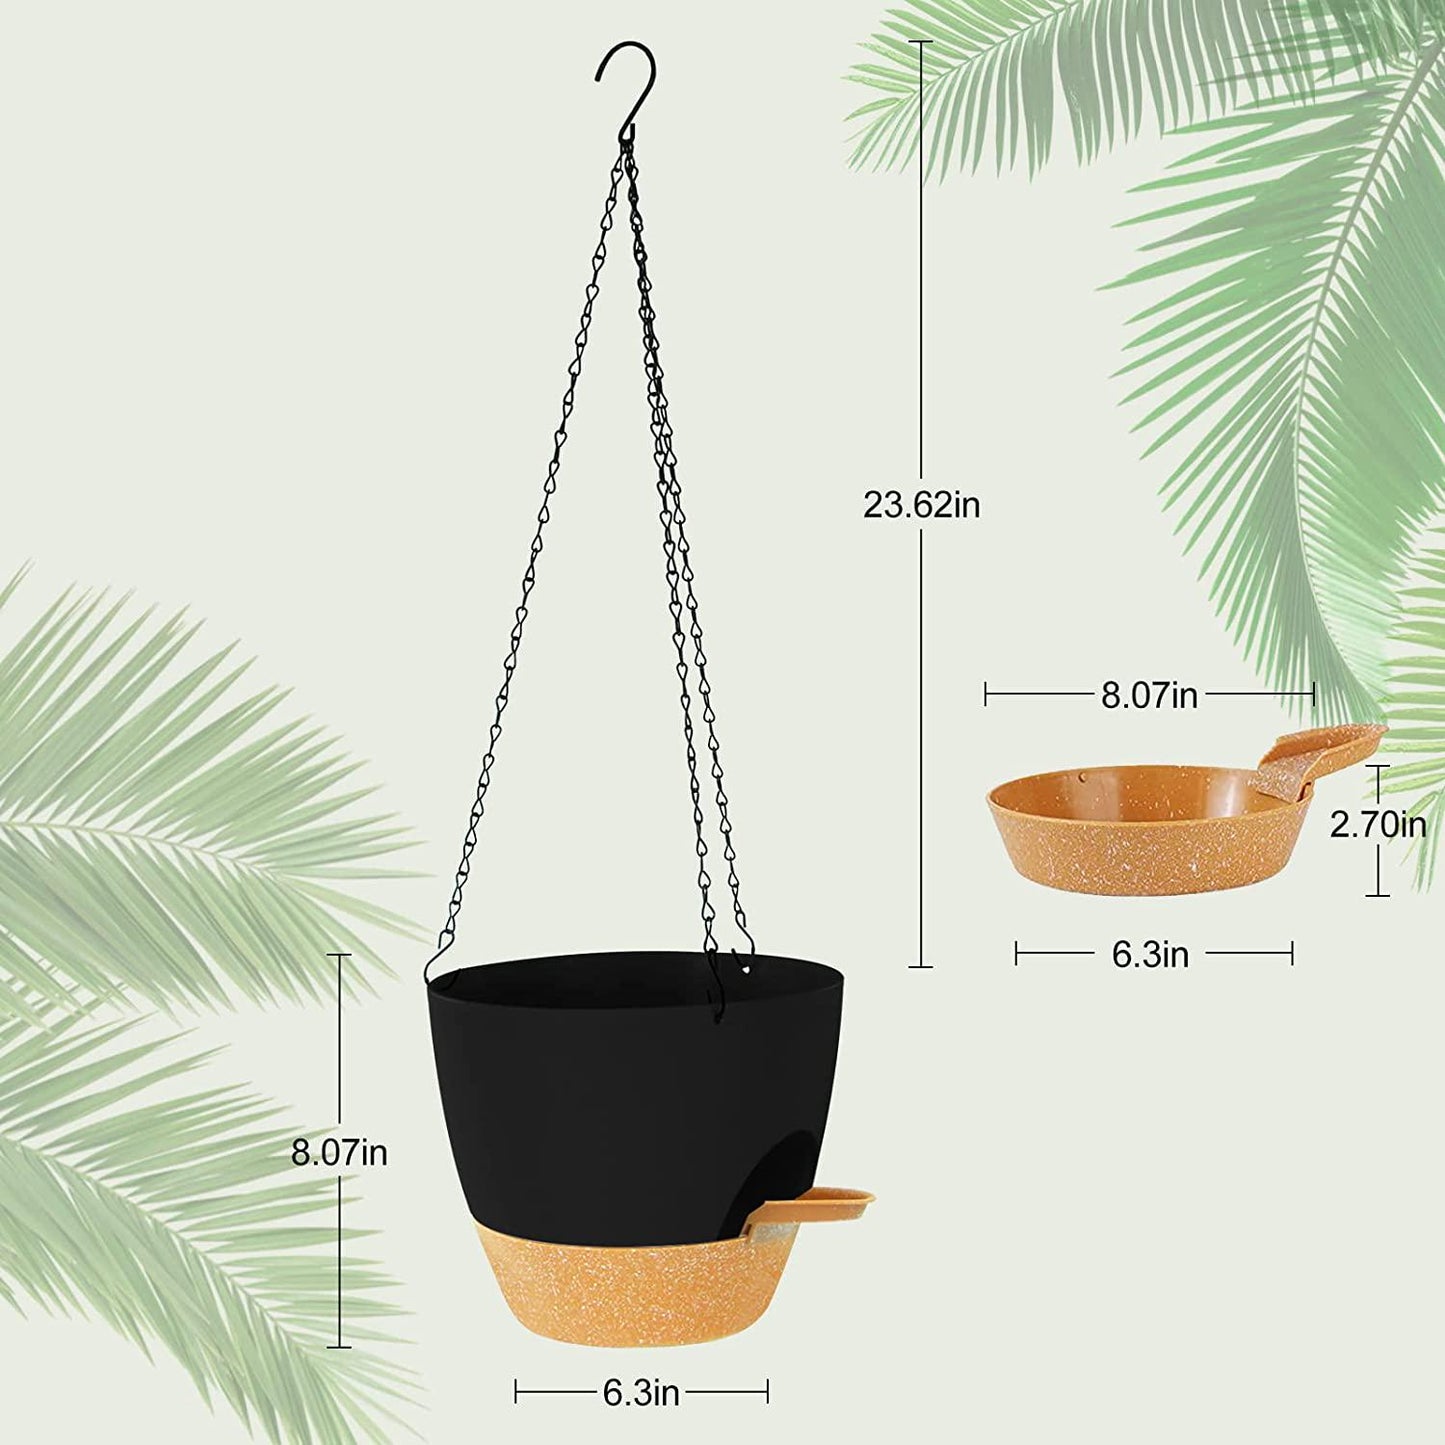 mossFlos 10 Inch Hanging Planters, 2pcs Self Watering Hanging Pots with Drainage Holes, 40oZ Deep Reservior for Indoor Outdoor Hanging Plastic, Hanging Flower Pots for Garden Home (Black)